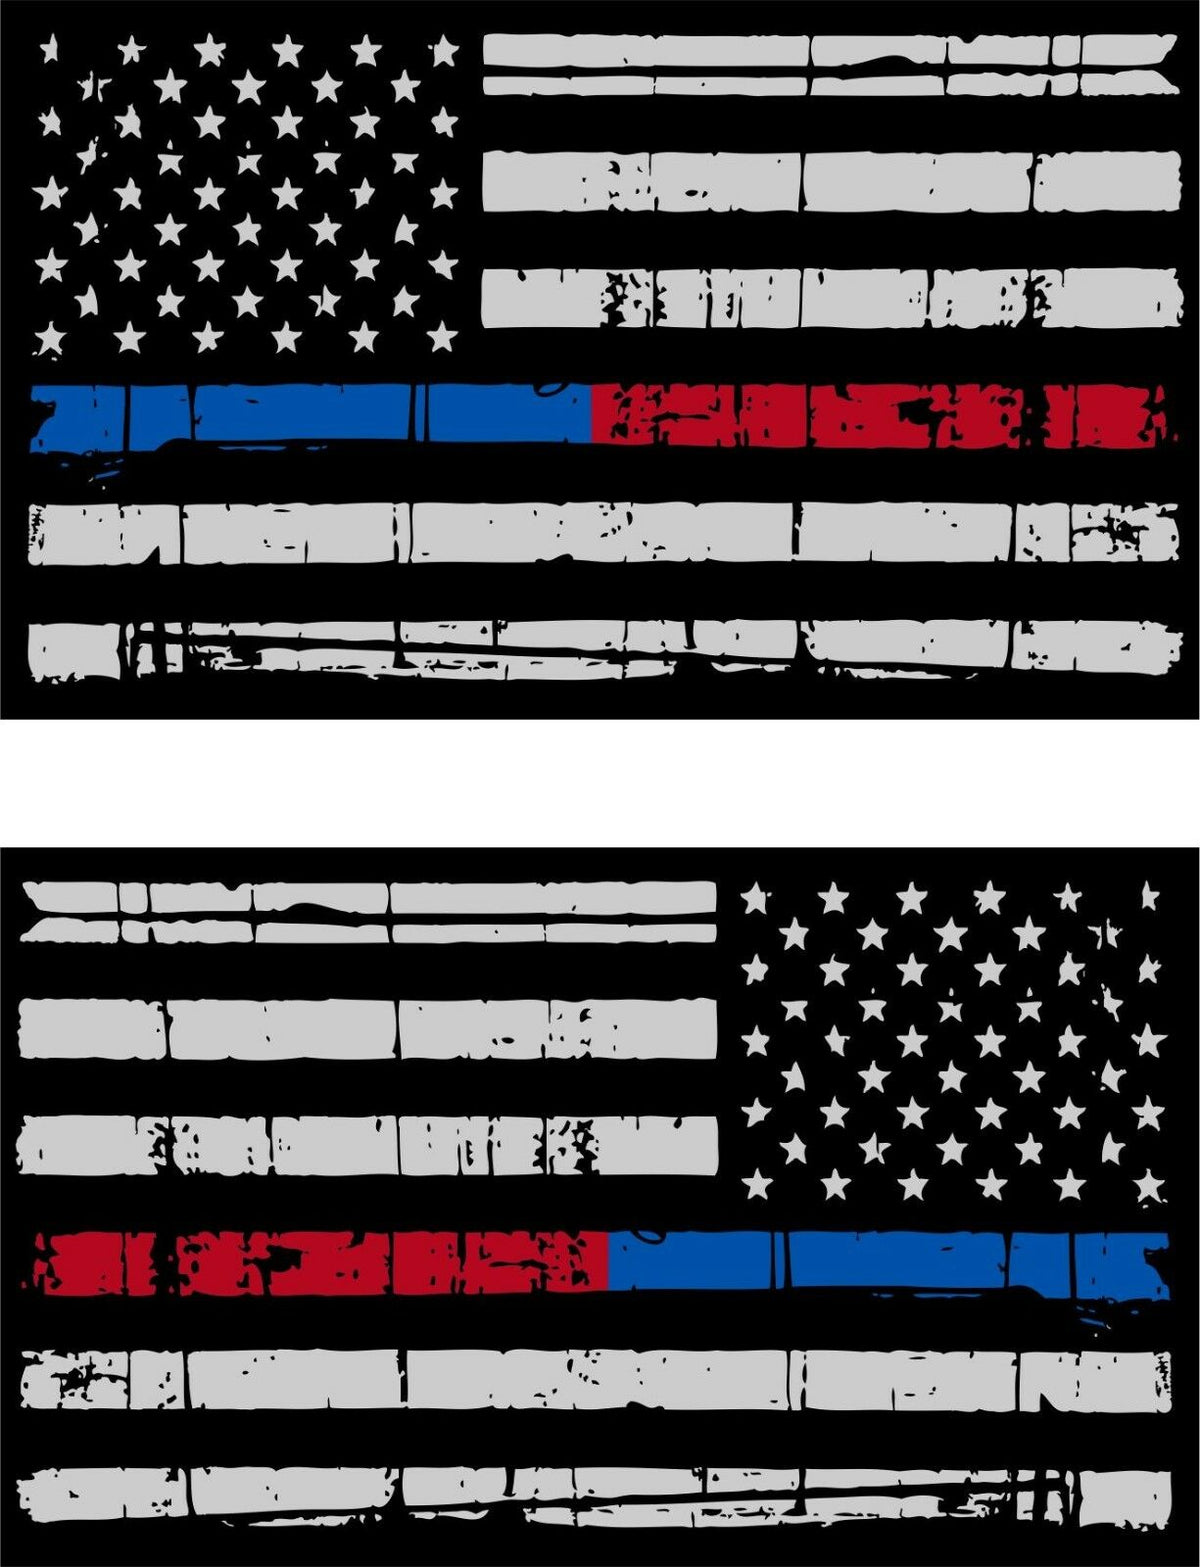 Tattered Police Fire Thin Blue/Red Line reflective American Flag 5"x3" Decal x 2 - Powercall Sirens LLC